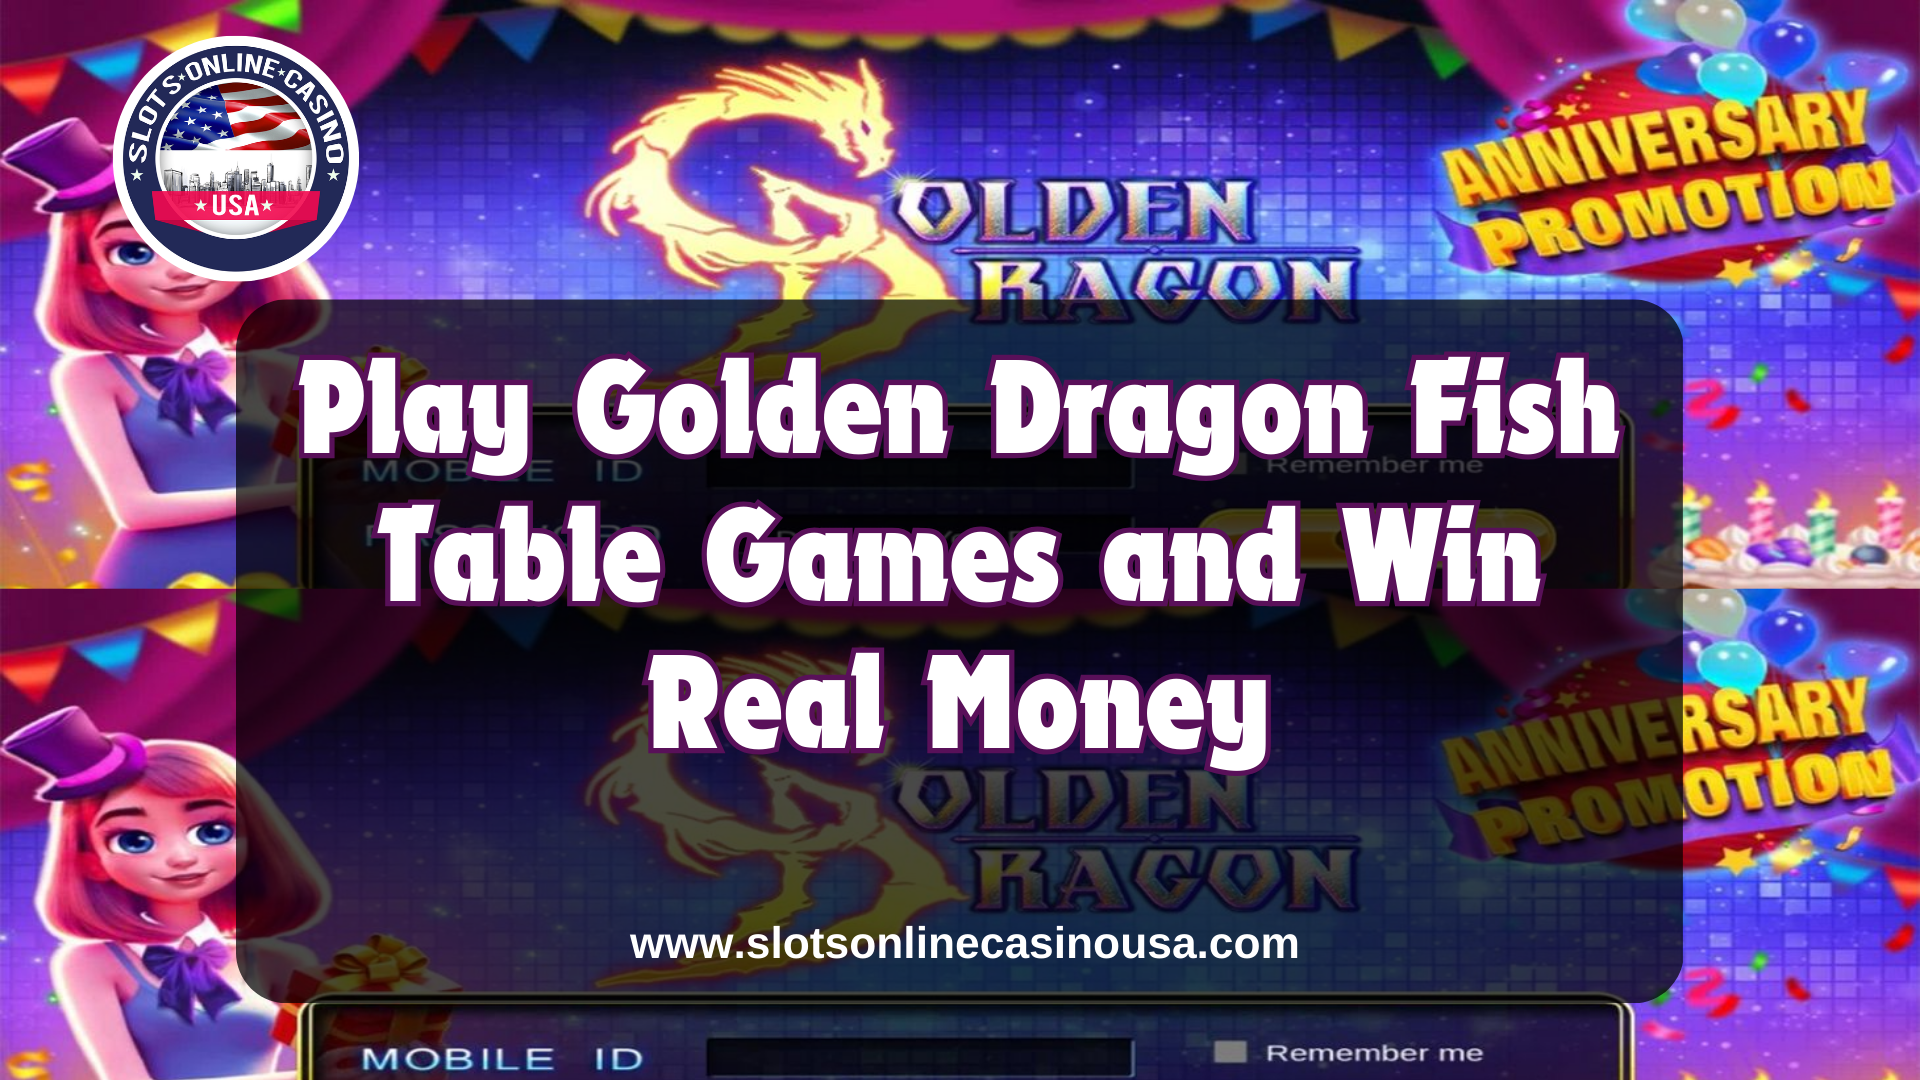 Play Golden Dragon Fish Table Games and Win Real Money